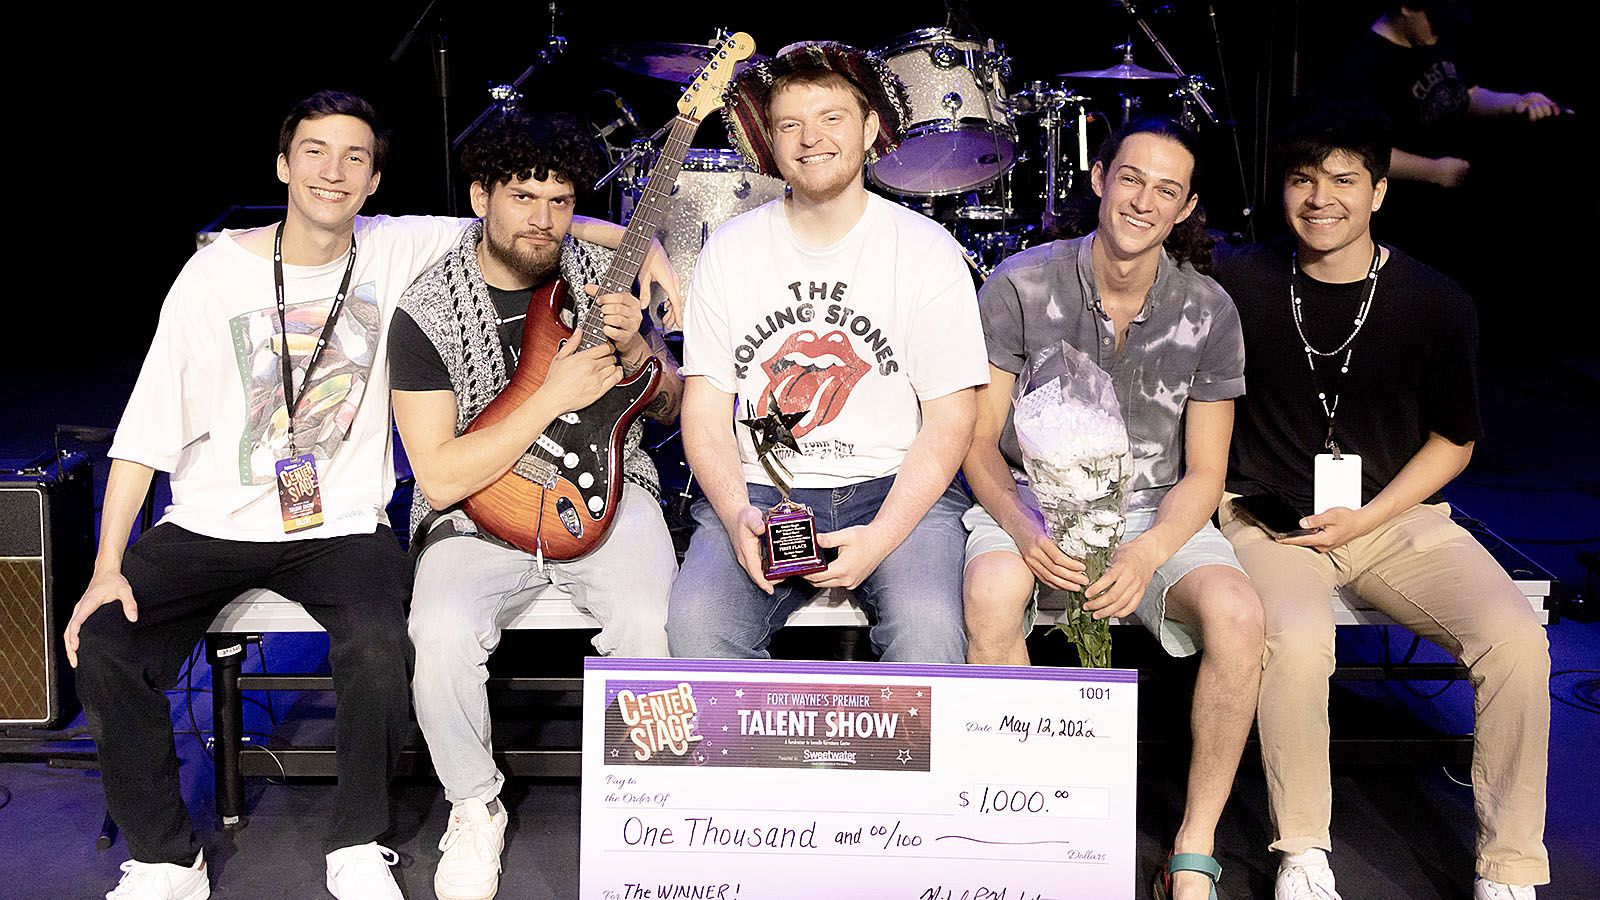 The winner of last year’s talent show and $1,000 was local jazz-fusion band Los Galaxy, from left, Takoda Collins, David Vaides, Zane Stackhouse, Jonathan Jehle, and Daniel Vaides. Not pictured: Ashton Morris.